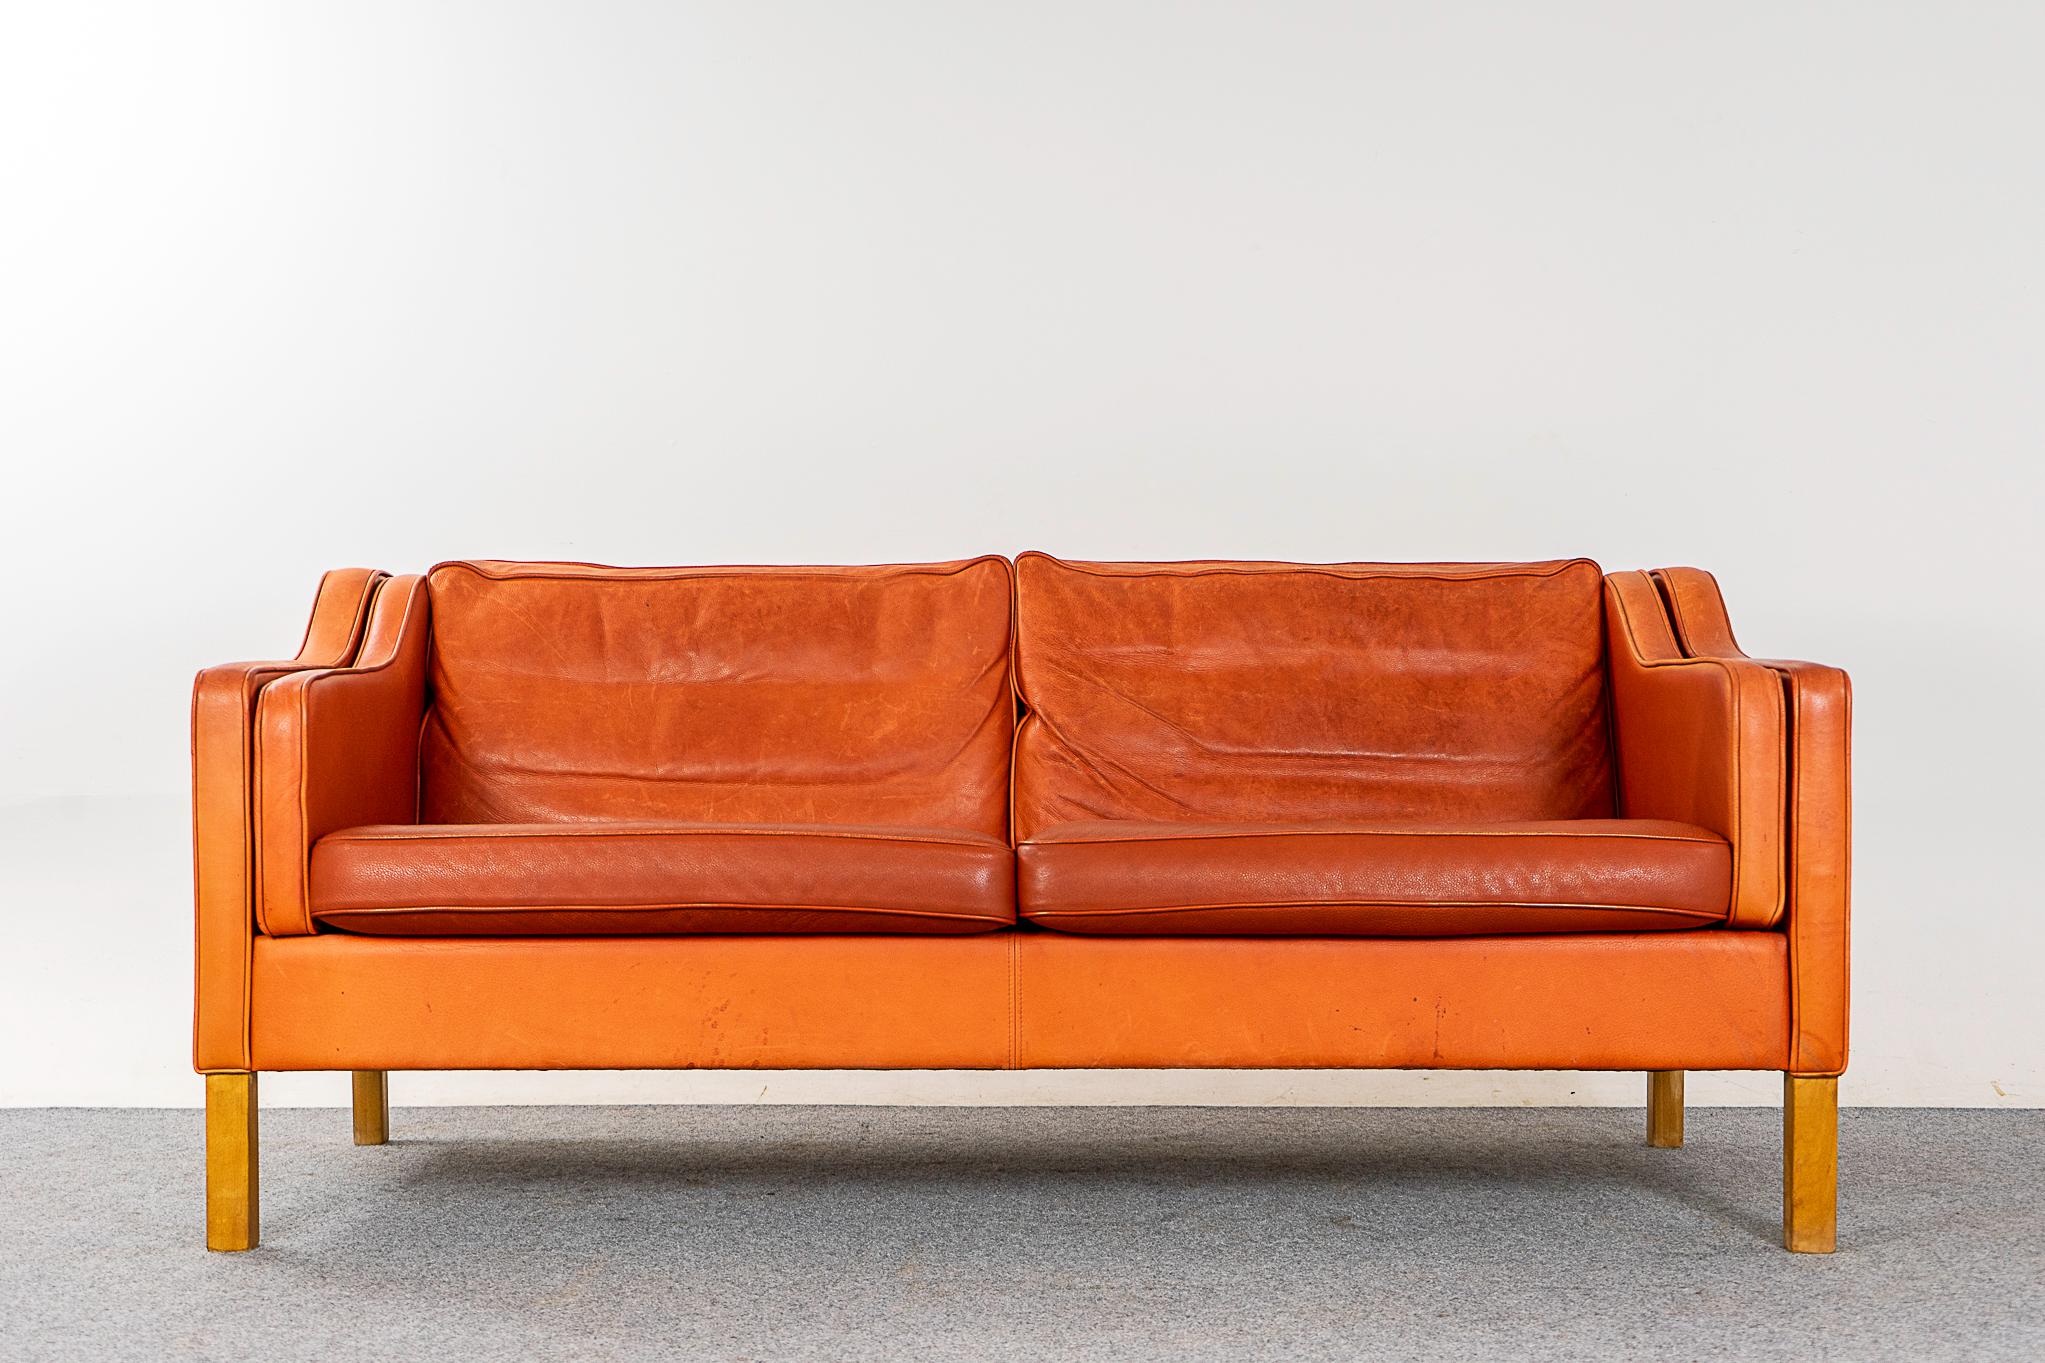 Leather Danish modern loveseat, circa 1960s. Soft and supple, yet durable enough to ensure years of enjoyment. Tangerine leather is highly patinated.

Please inquire for international shipping rates.